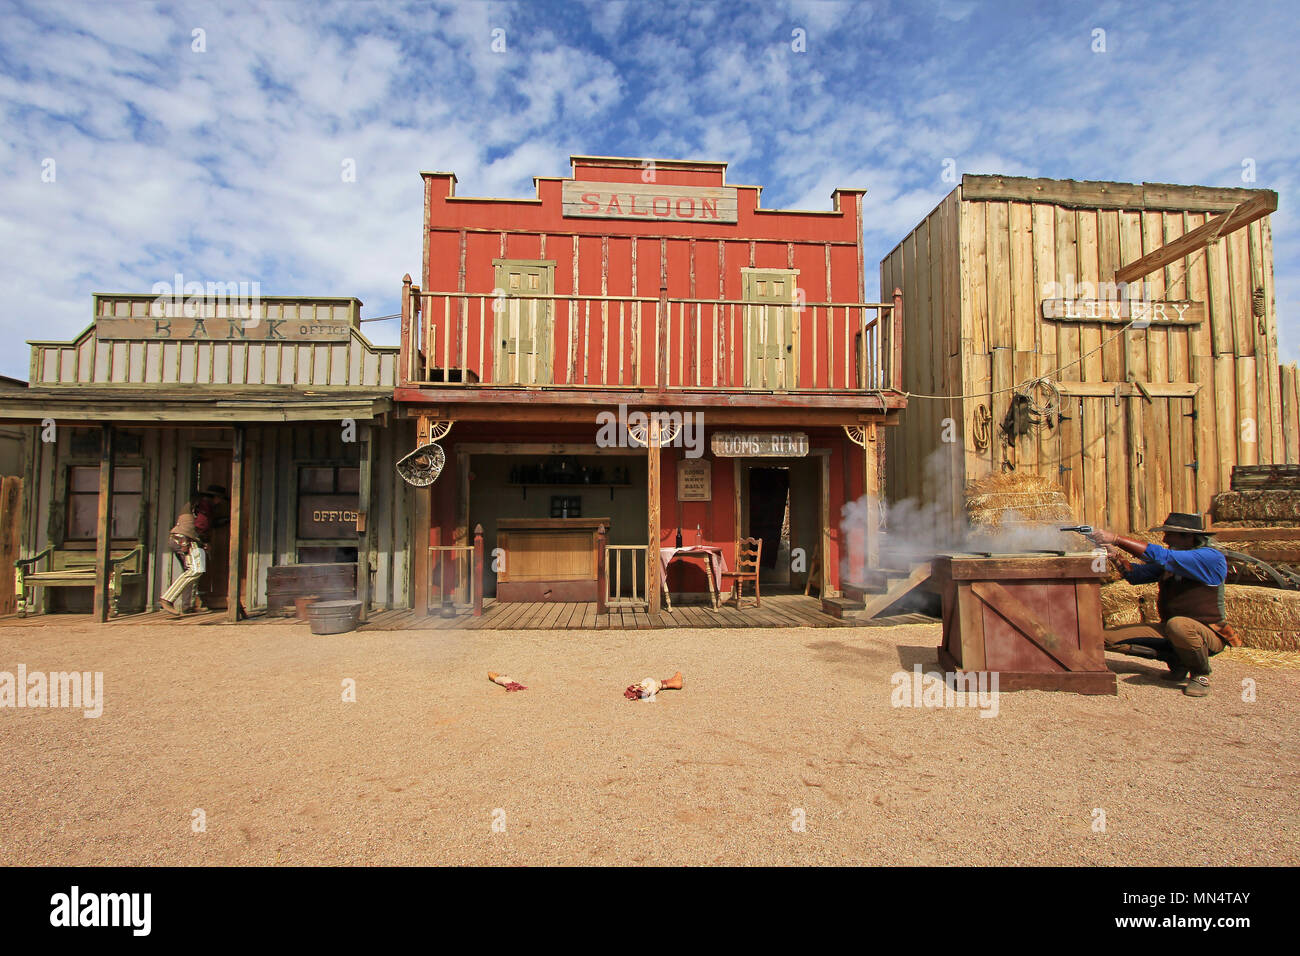 TOMBSTONE, ARIZONA, USA, MARCH 4, 2014: Actors playing the O.K. Corral gunfight shootout in Tombstone, Arizona, USA on March 4, 2014 Stock Photo